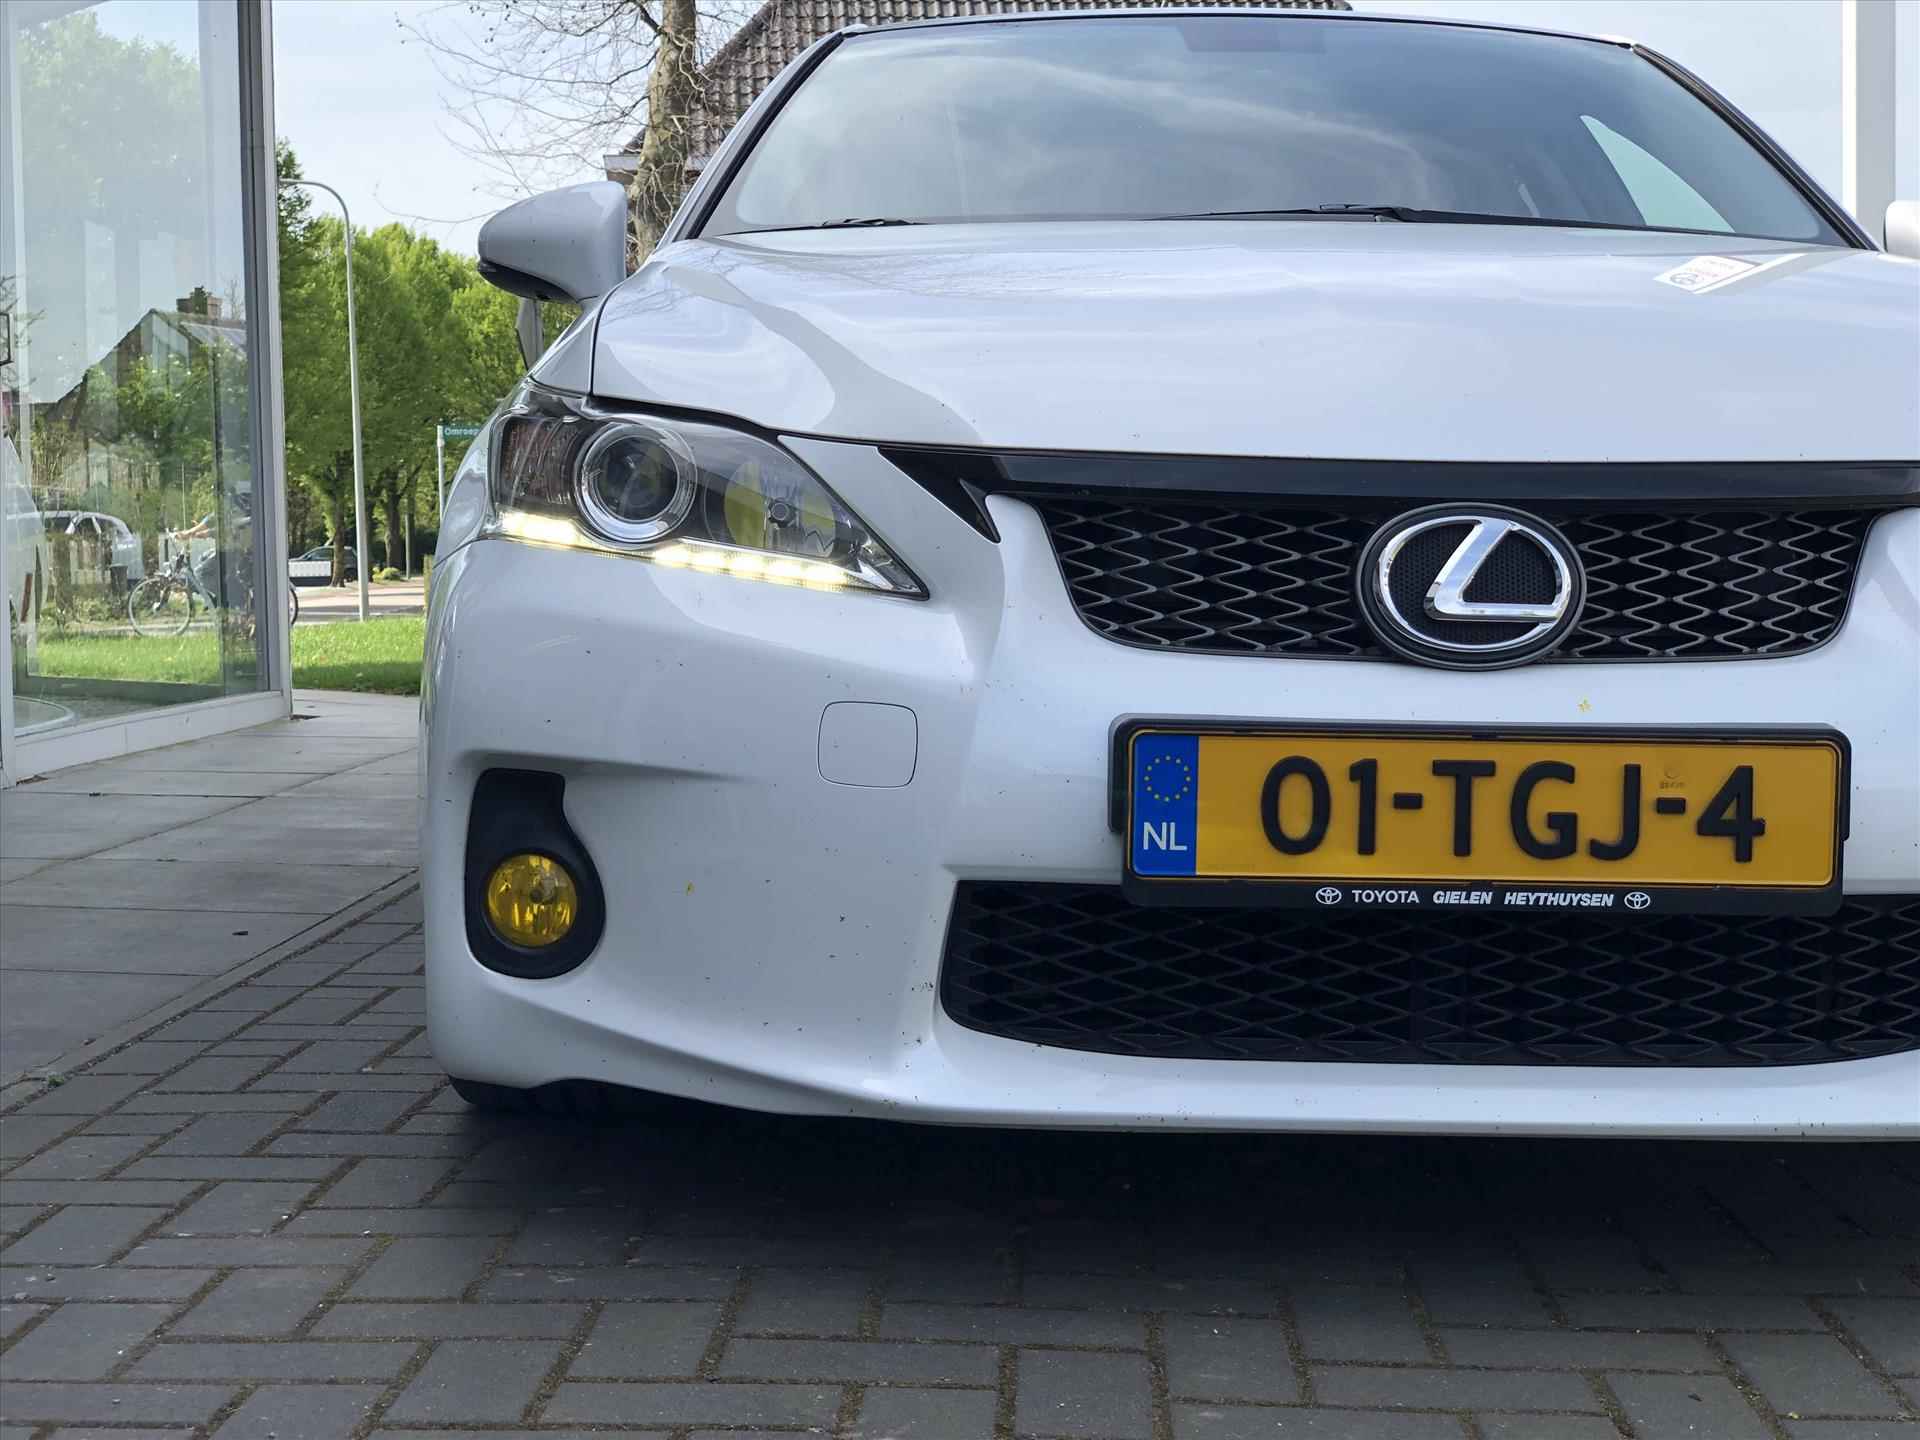 Lexus Ct 200h Business Line Pro F Sport Grill | Parkeercamera, Keyless, Cruise control, 18 inch, Privacy Glass, Zeer compleet! - 3/39